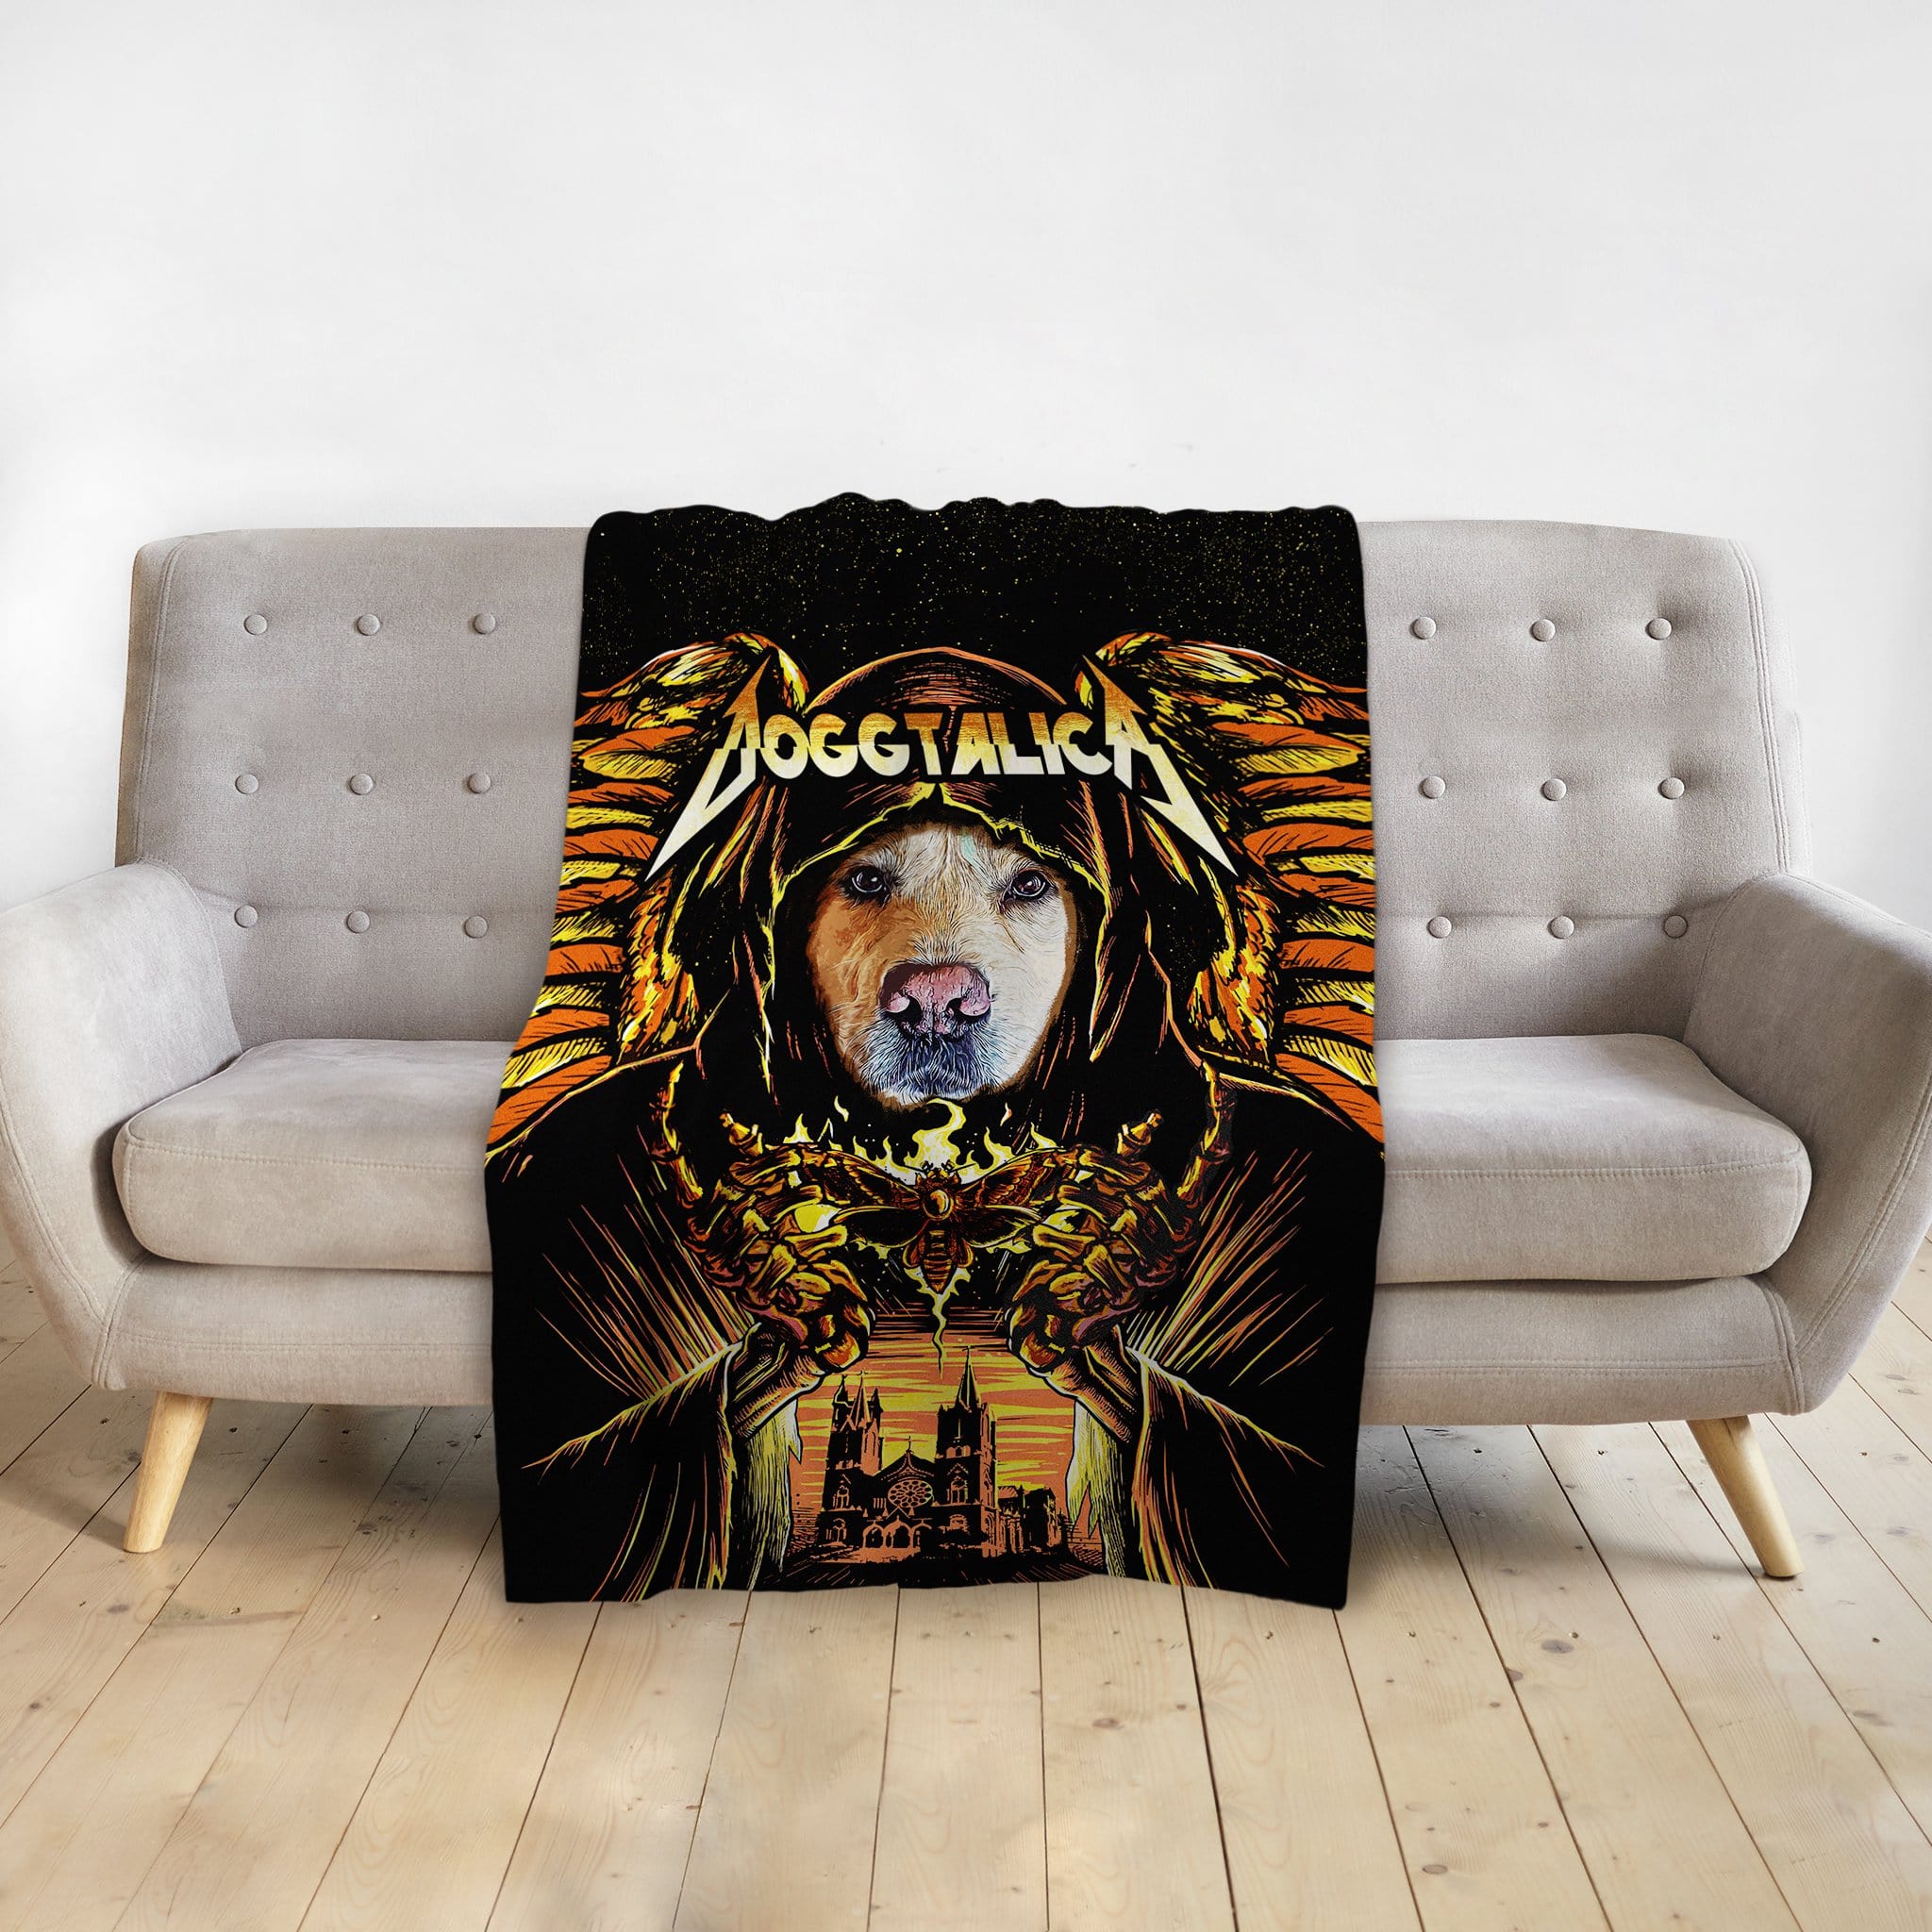 &#39;Doggtalica&#39; Personalized Pet Blanket